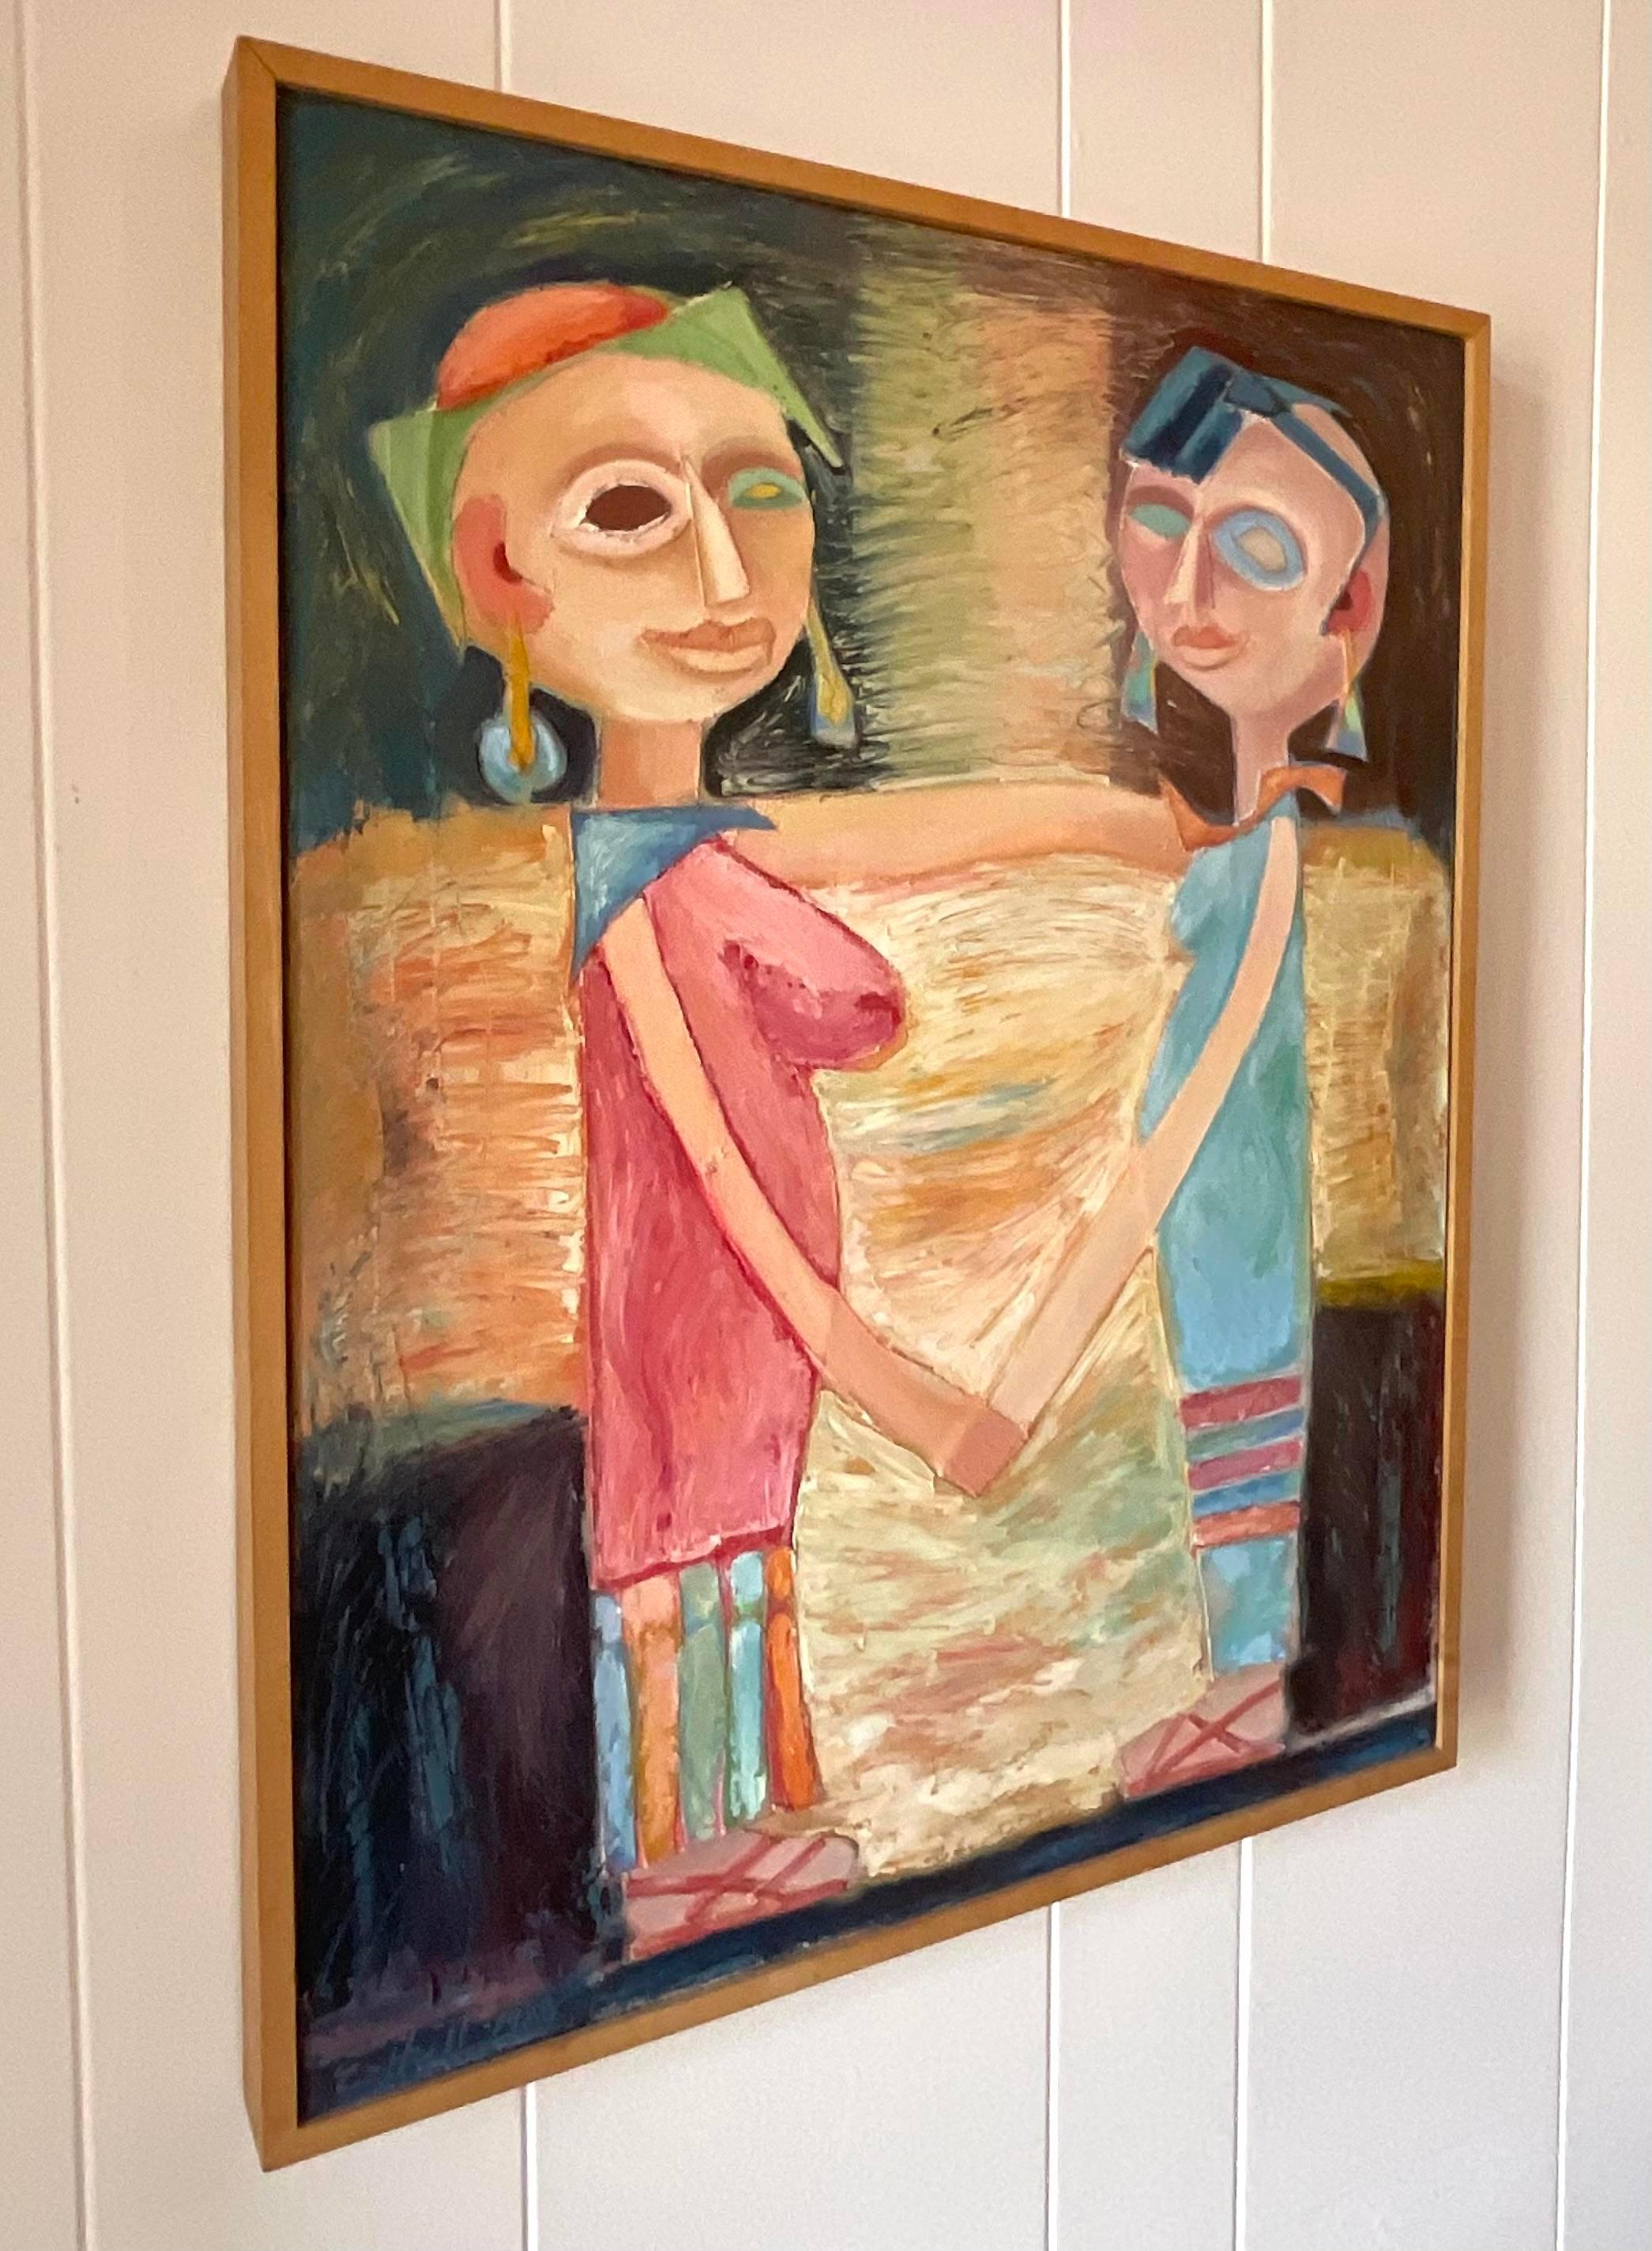 A fabulous vintage French original Mixed Media on canvas. A chic Modernist Figural in bright clear colors. Signed on the back. Acquired from a Palm Beach estate.